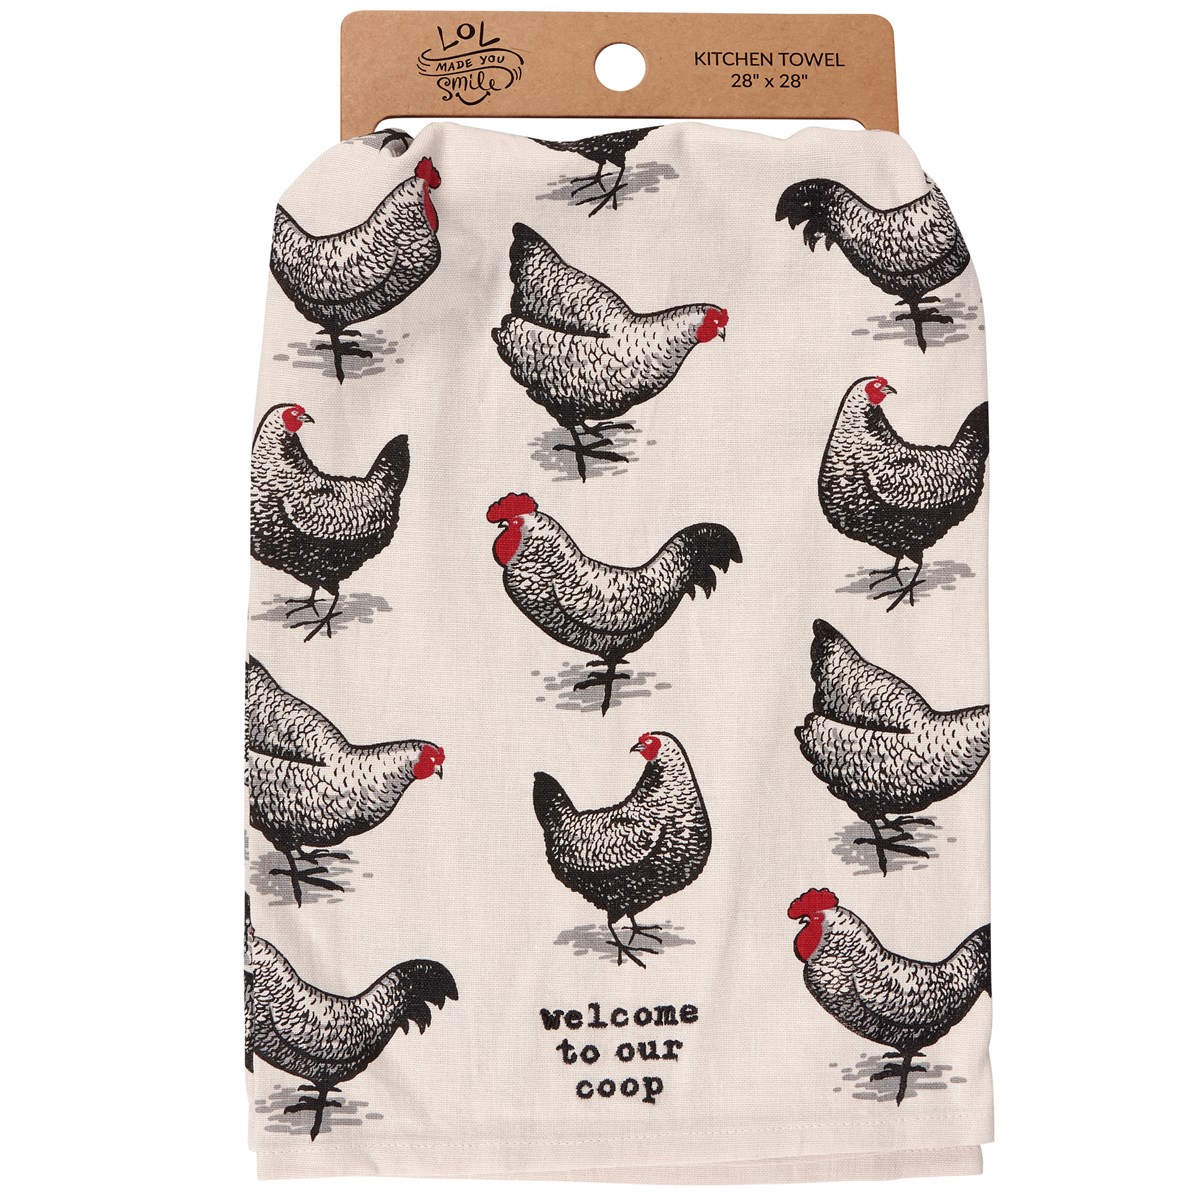 Welcome To Our Coop Kitchen Towel - Cotton, Linen